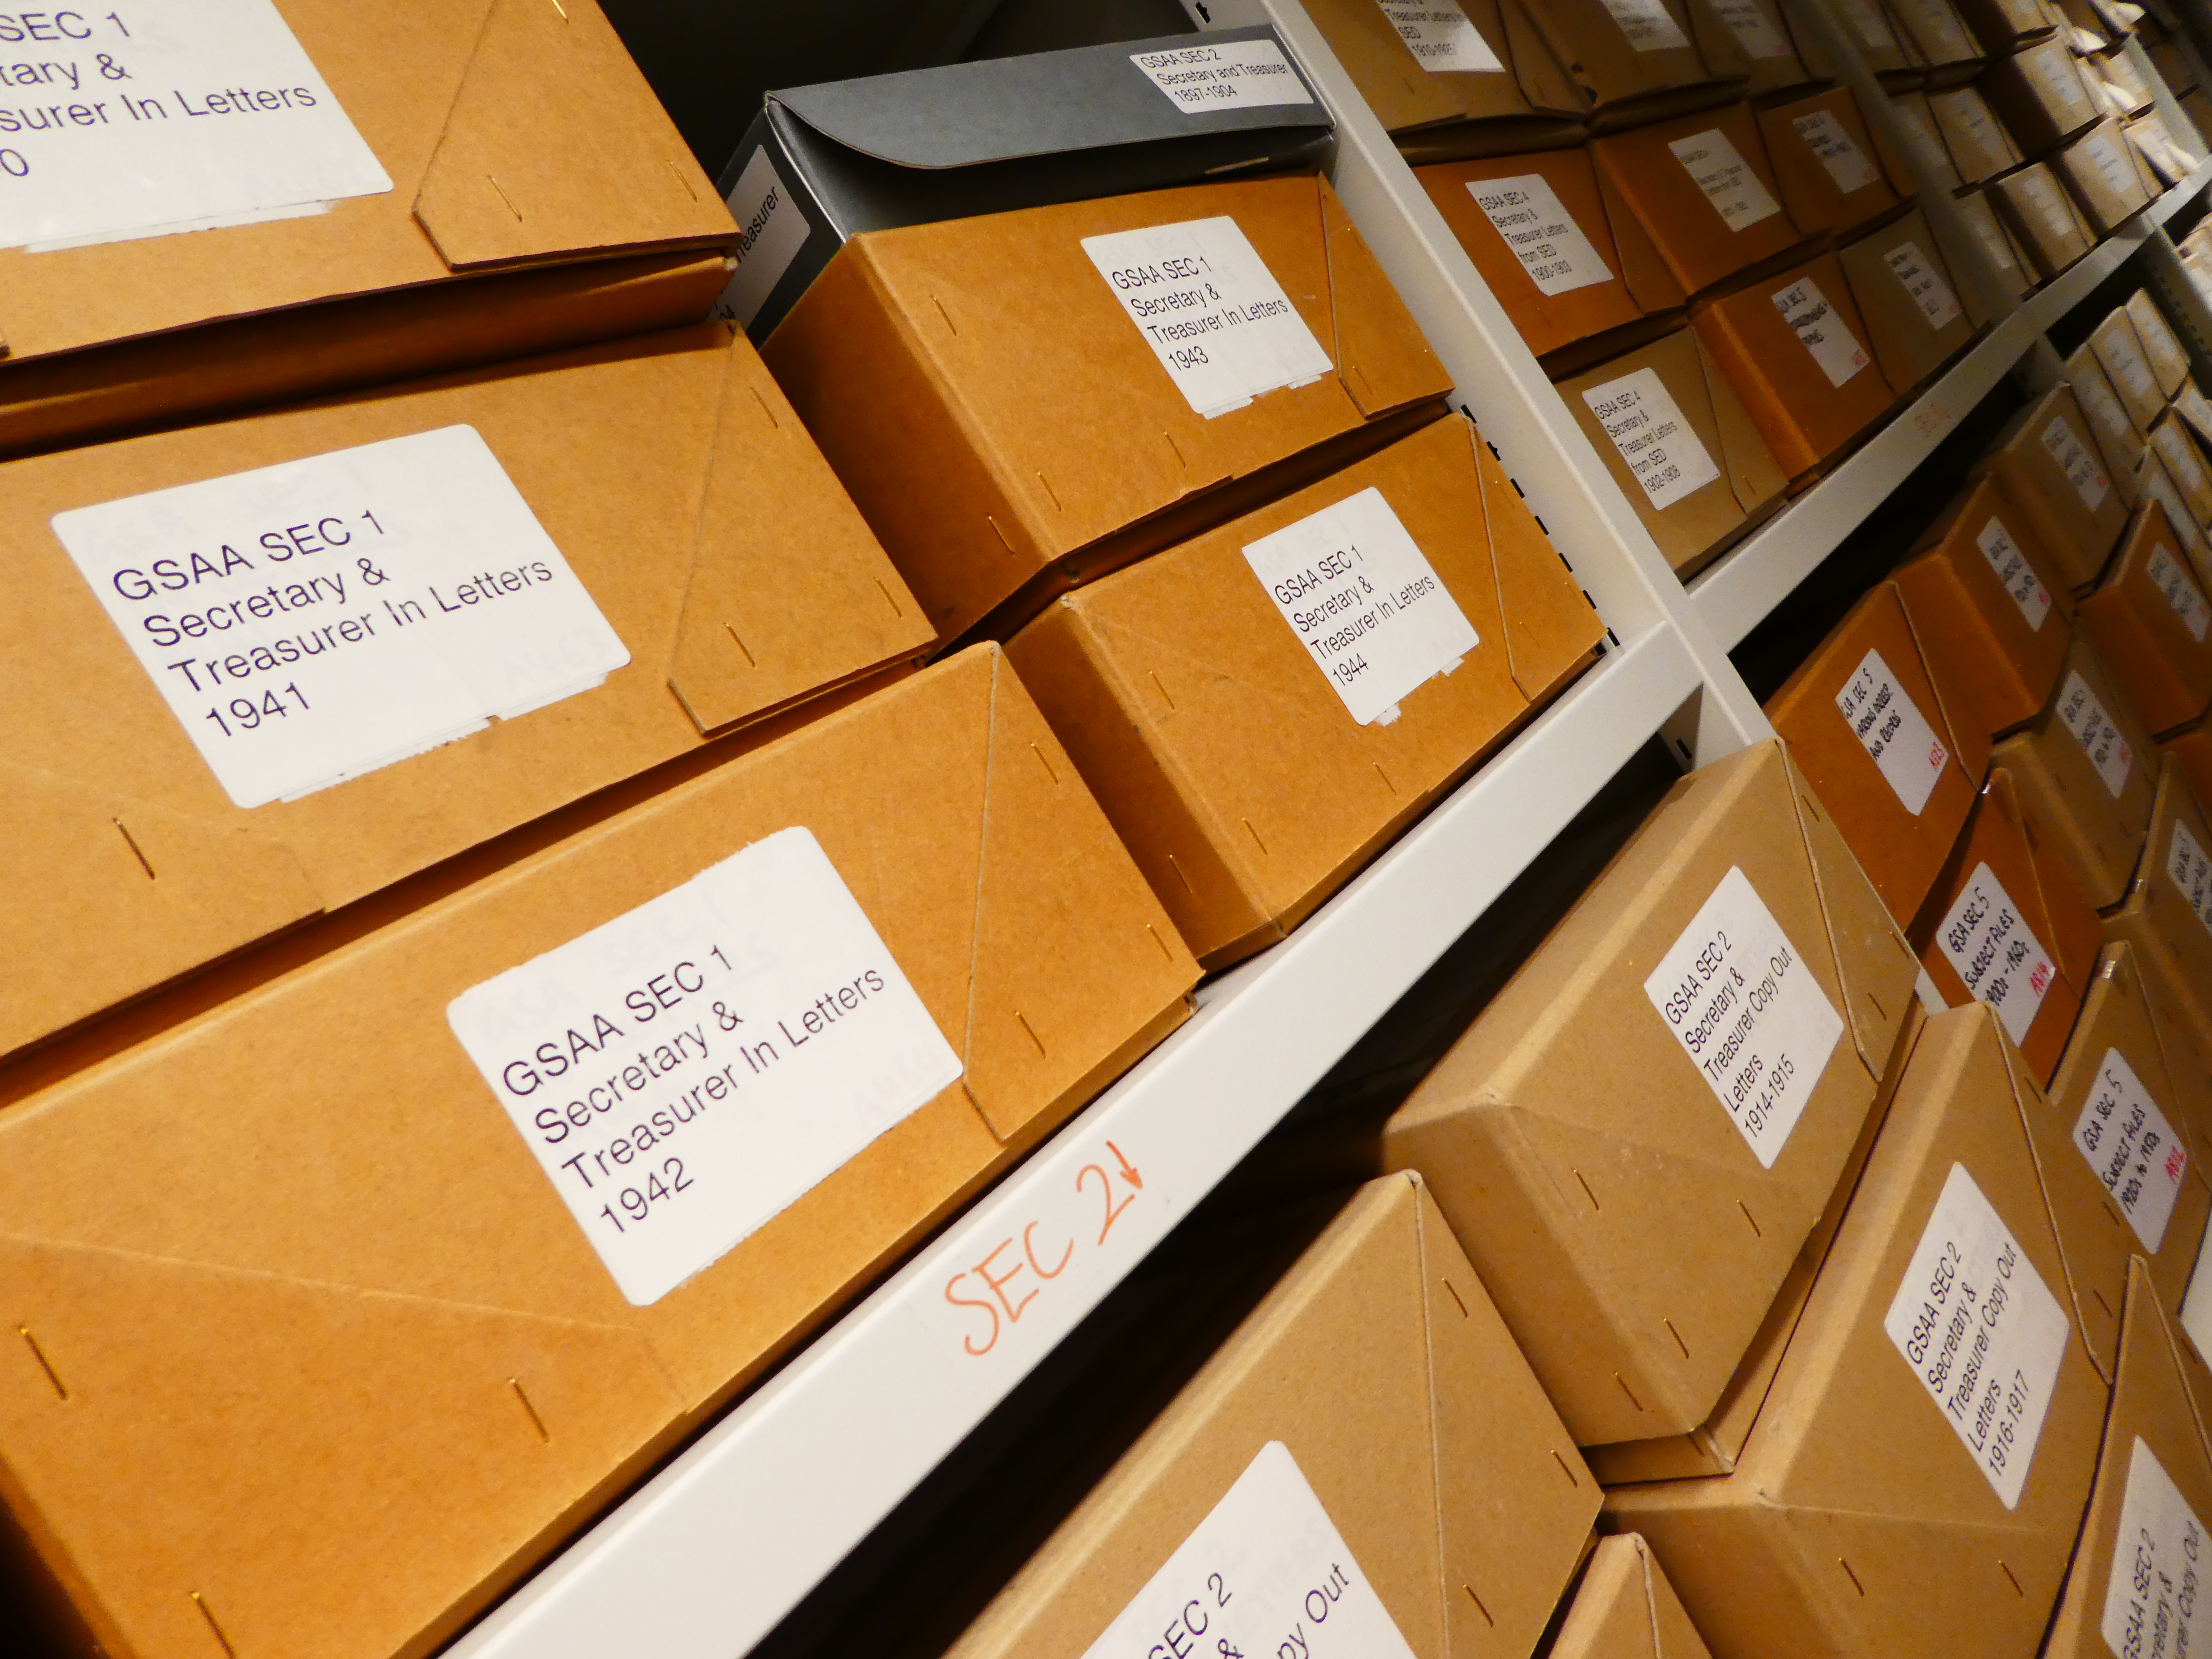 Our Secretary and Treasurers papers make up a great deal of our institutional archive!